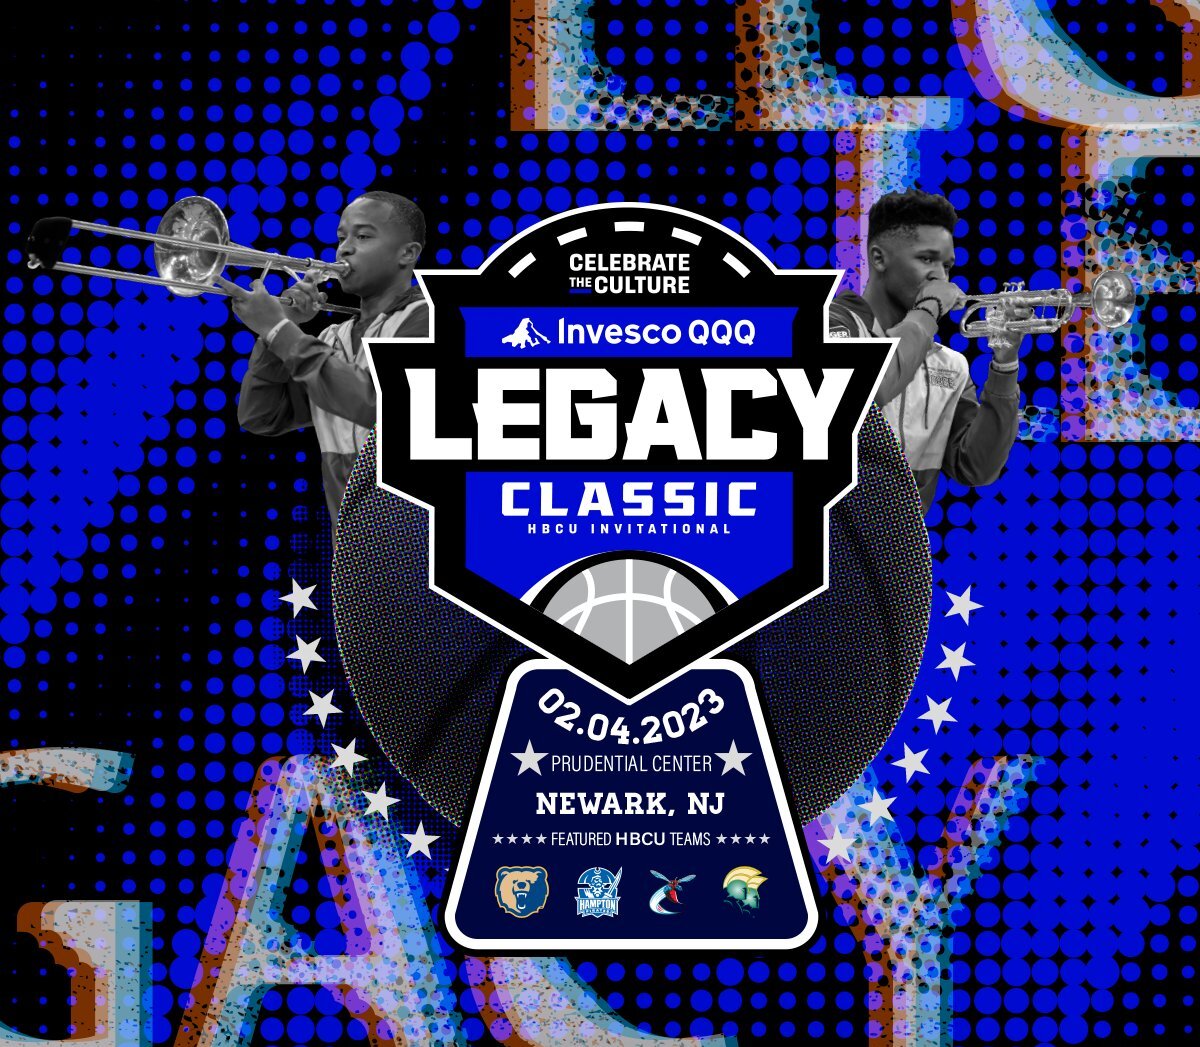 It's Invesco QQQ @LegacyClassic Game Week! Still in need of tickets? Click the link below to purchase yours now! bit.ly/3HwYPDc